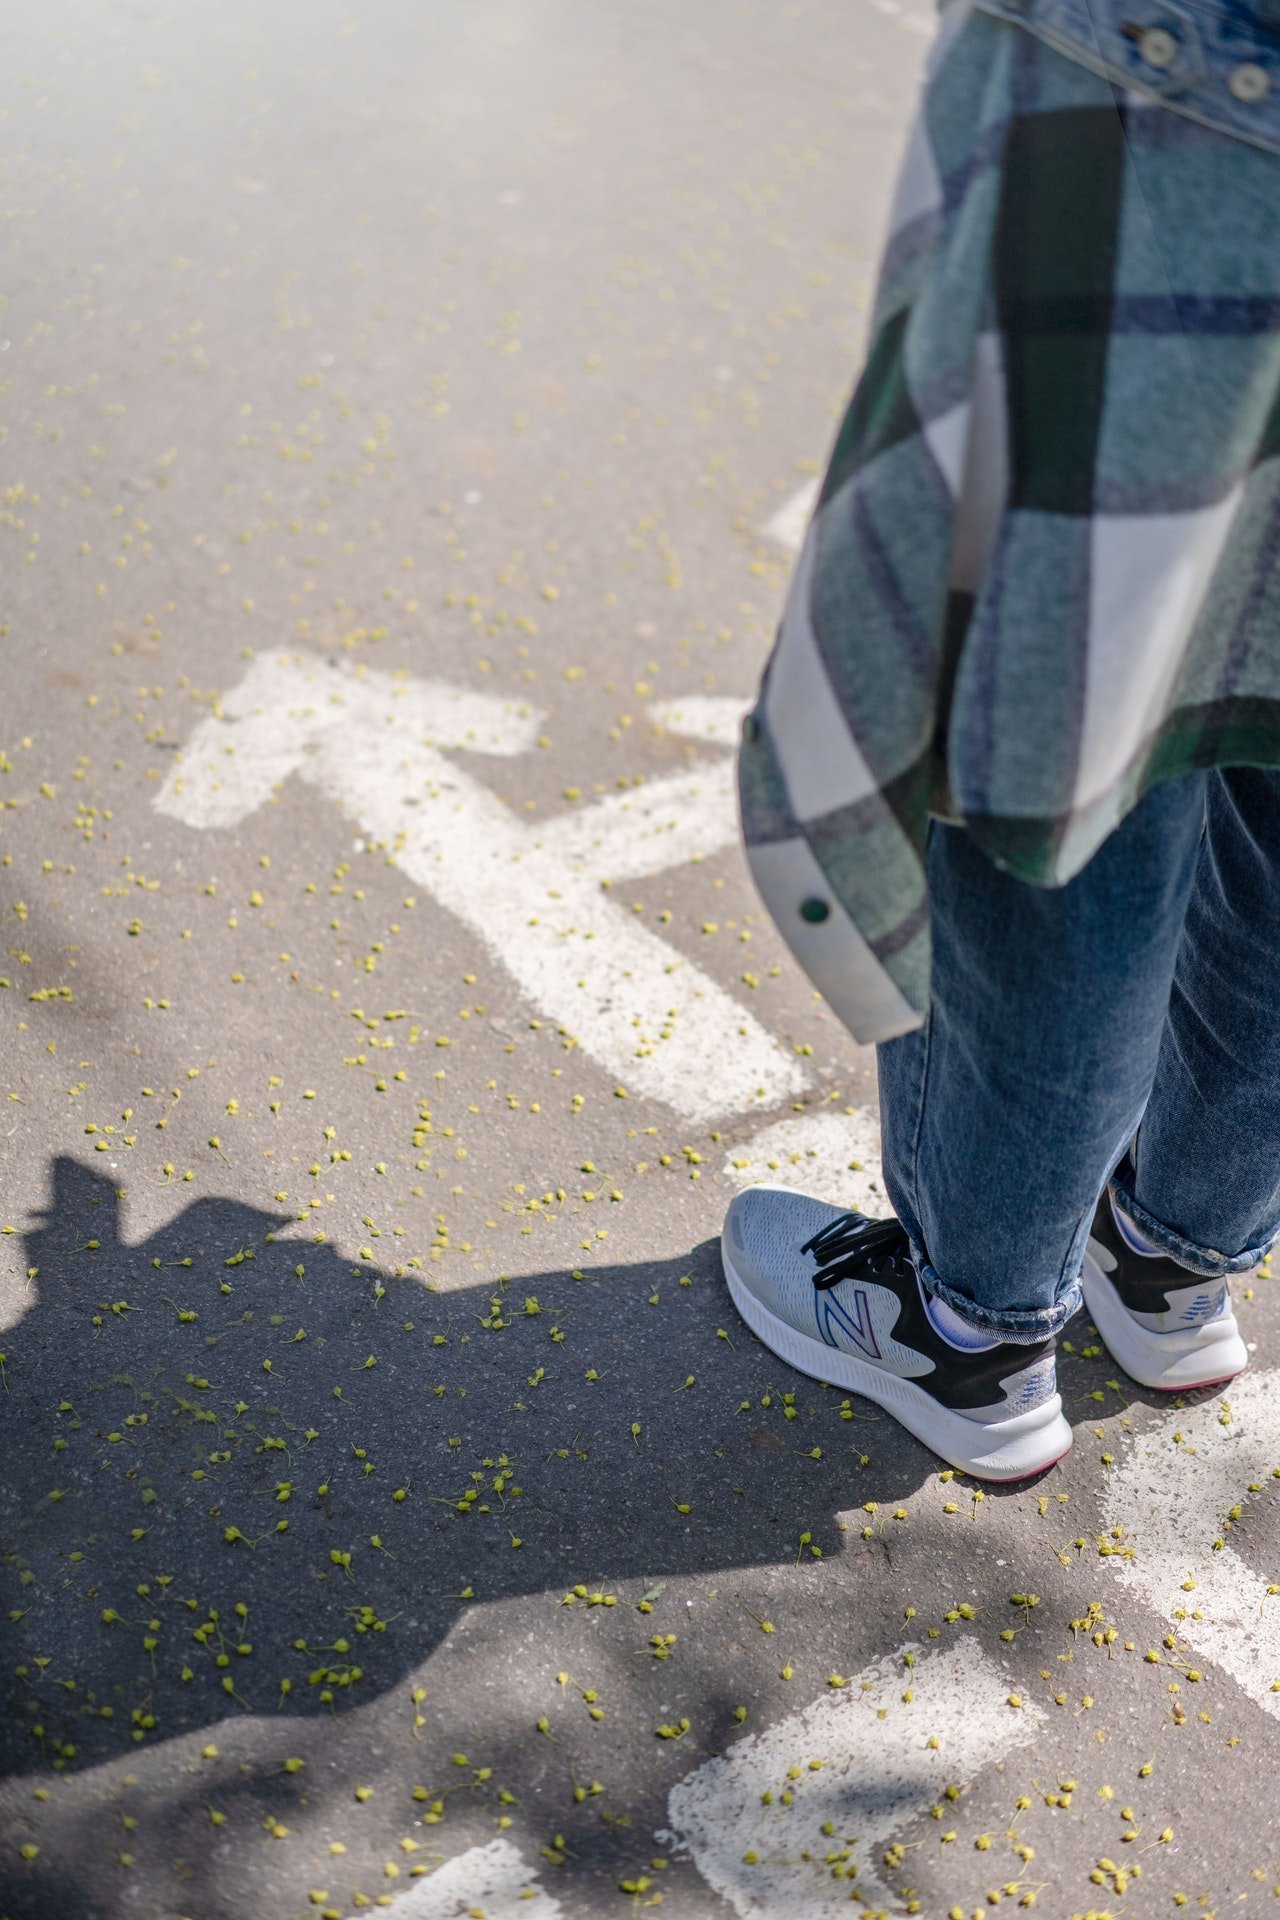 Anna stayed at the crosswalk for a while wondering what to do. | Source: Pexels